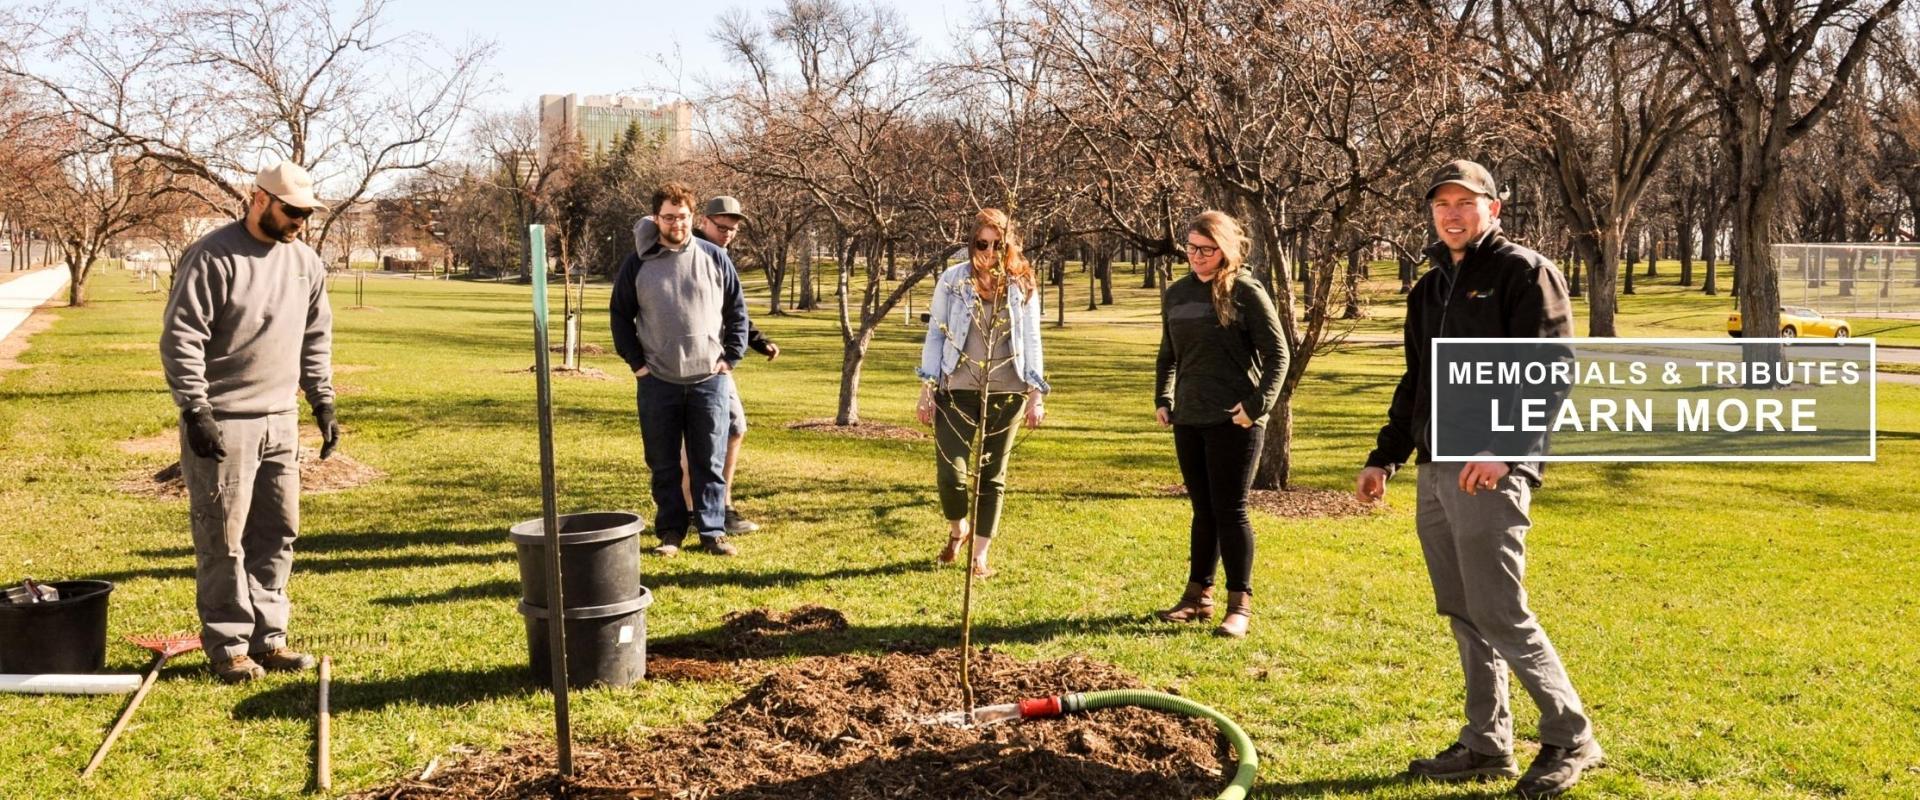 This photo shows people planting a tree at Island Park